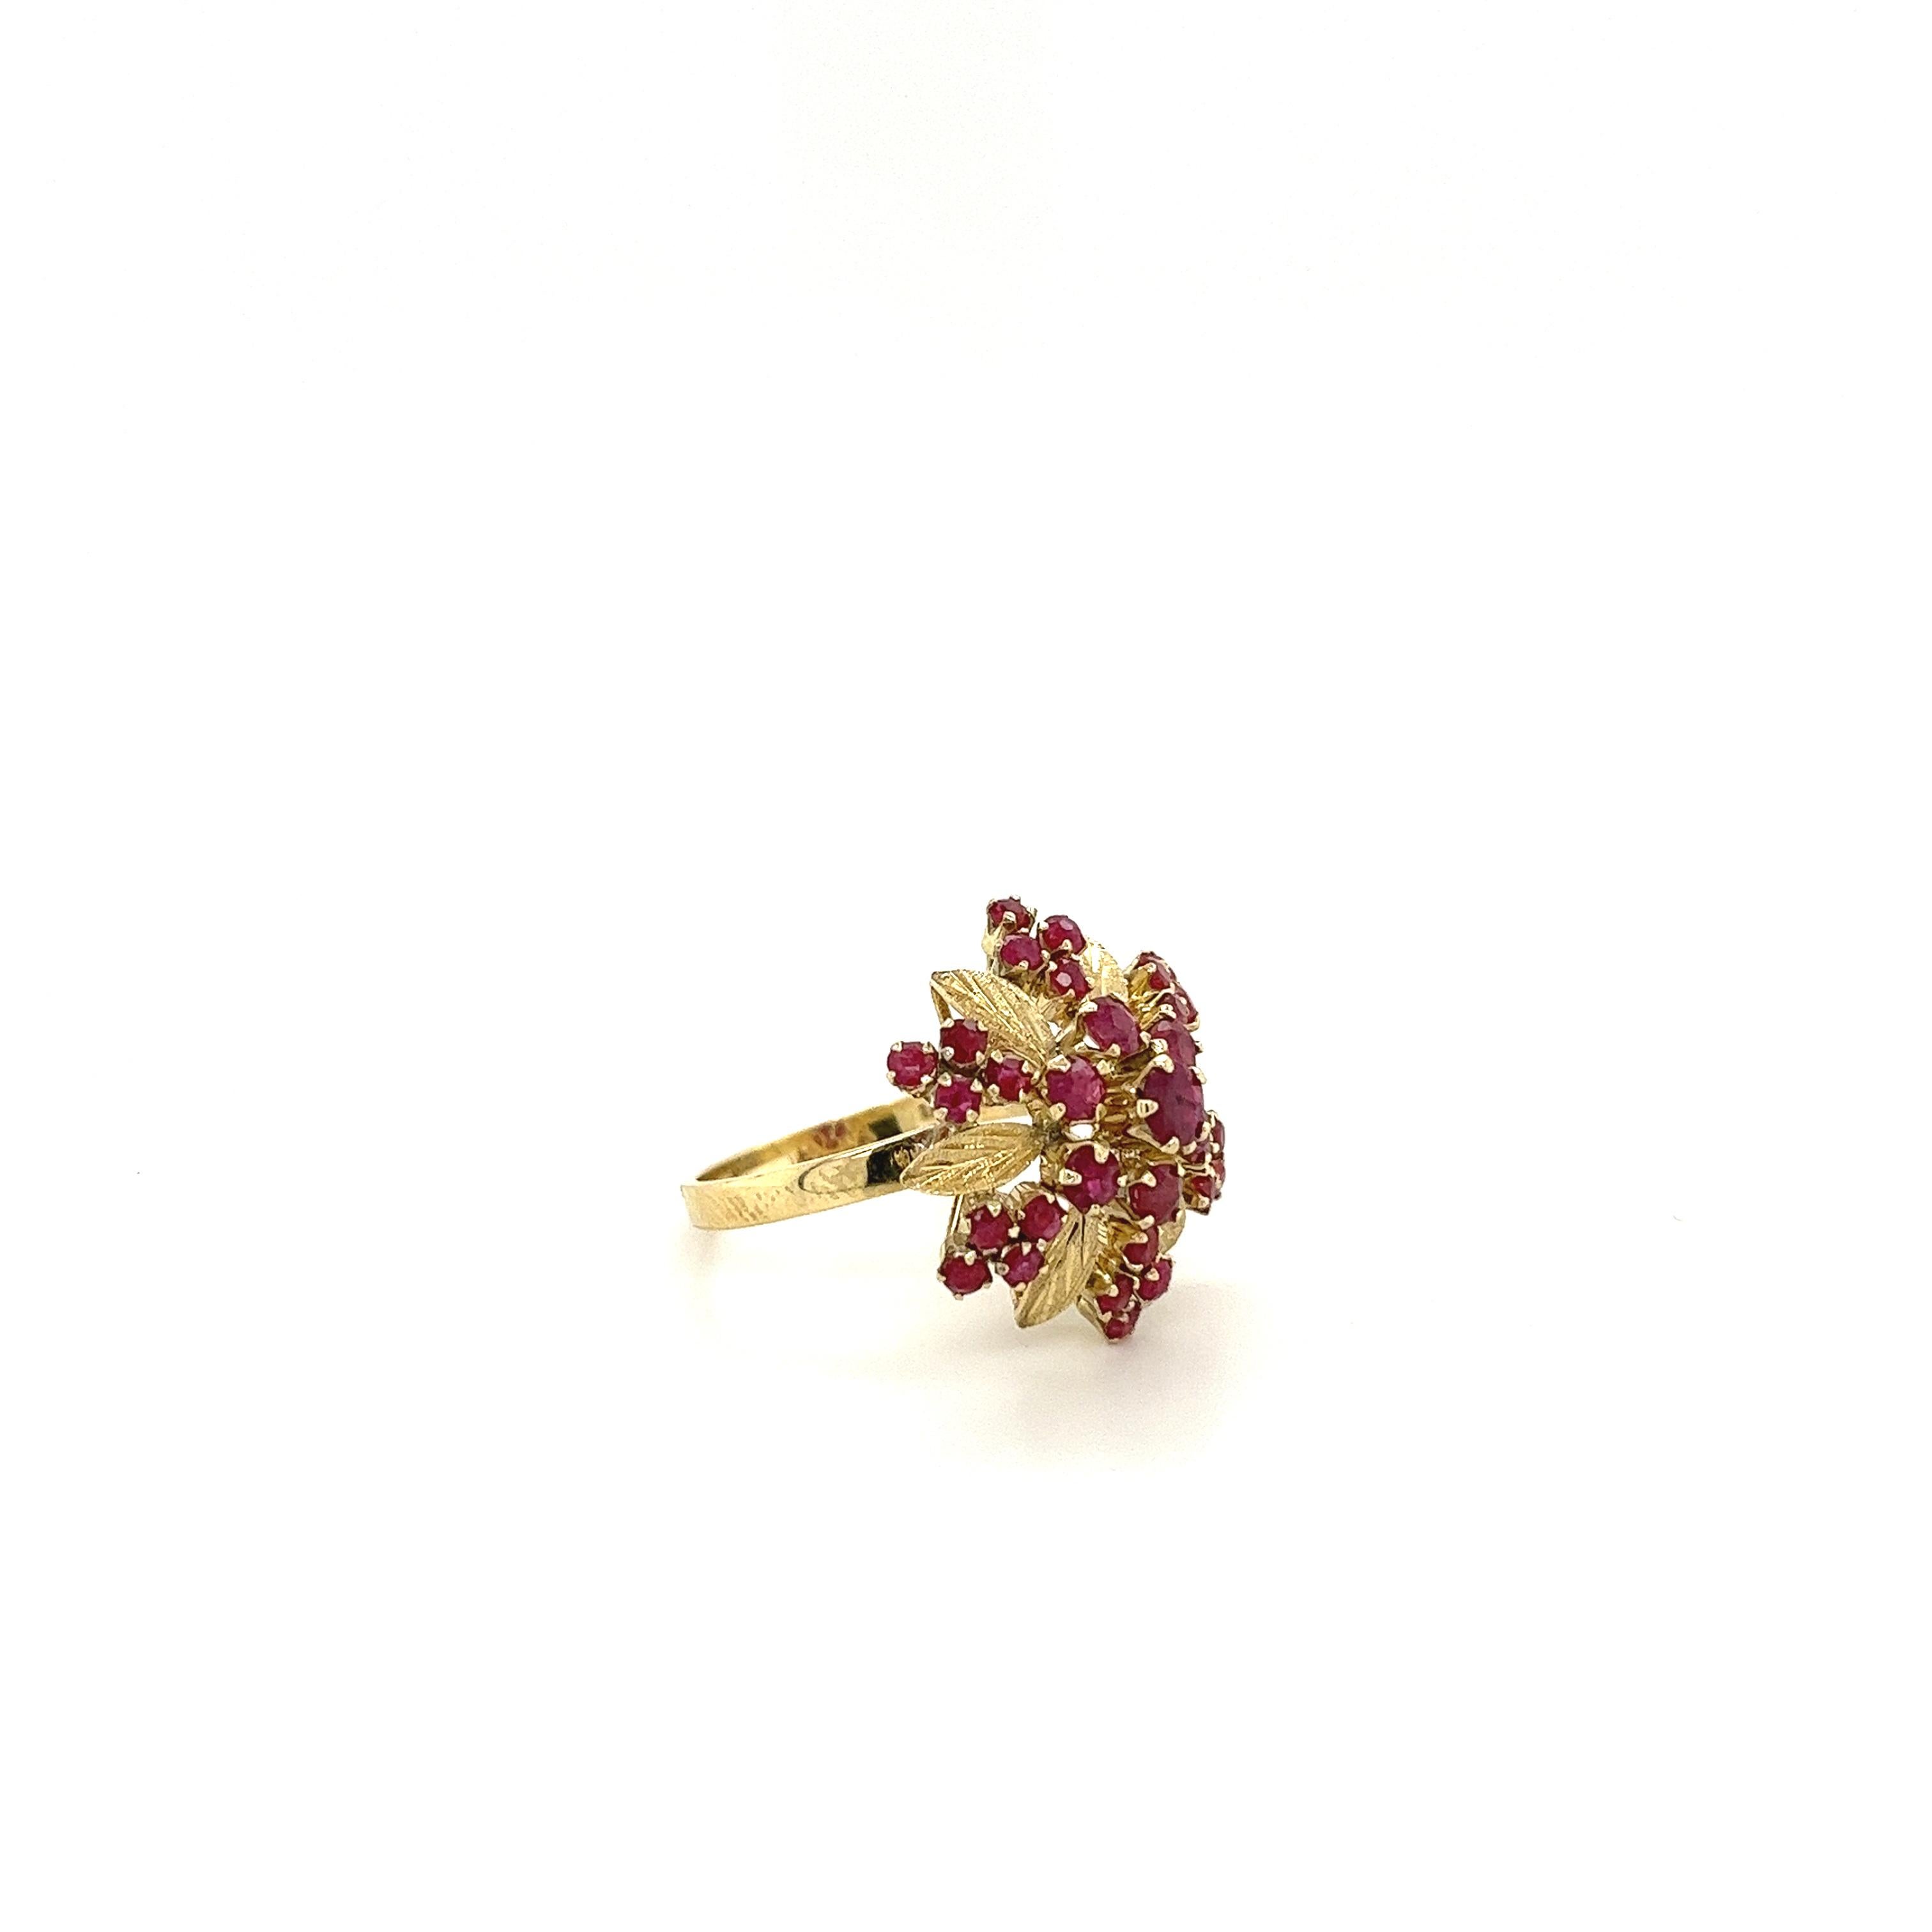 31 round-cut natural Rubies set in 5 symmetrical lines with separating carved gold flowers. A vintage Art Nouveau-inspired twist on a traditional dome cluster ring. The vibrant red Rubies create a stunning rose motif that's certain to turn heads at